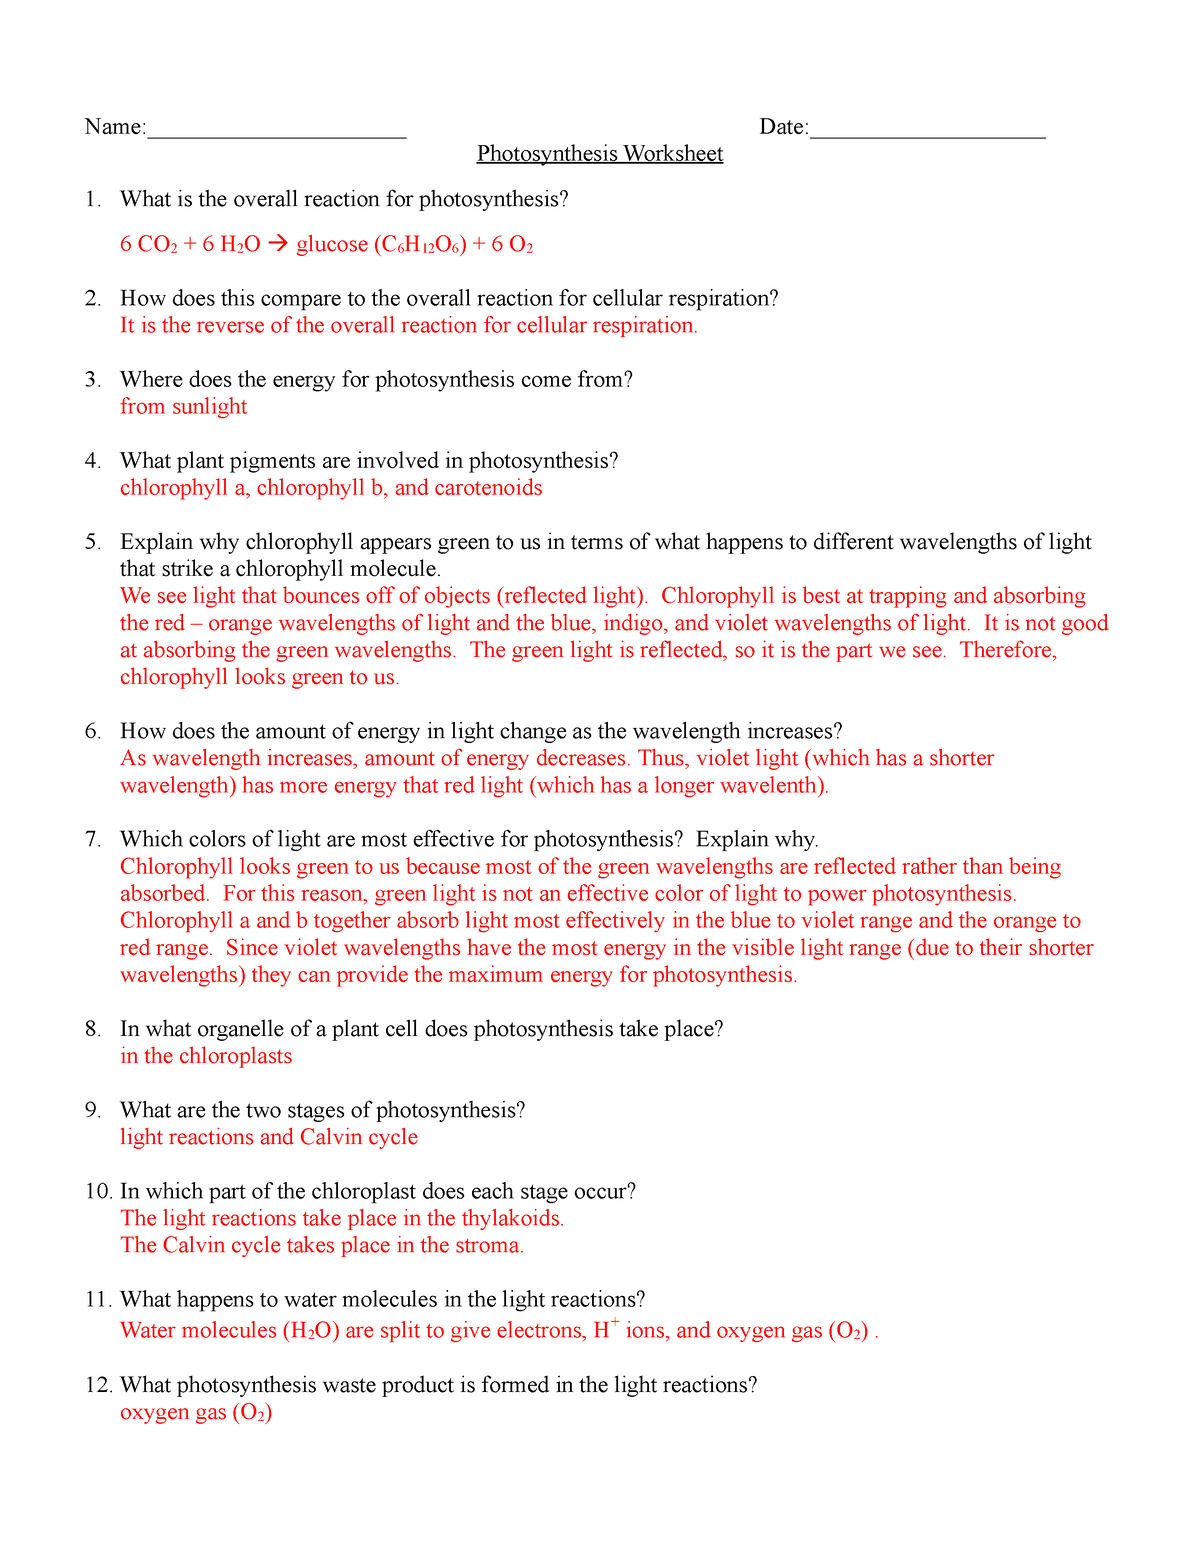 Photosynthesis Worksheet Answers Quizlet